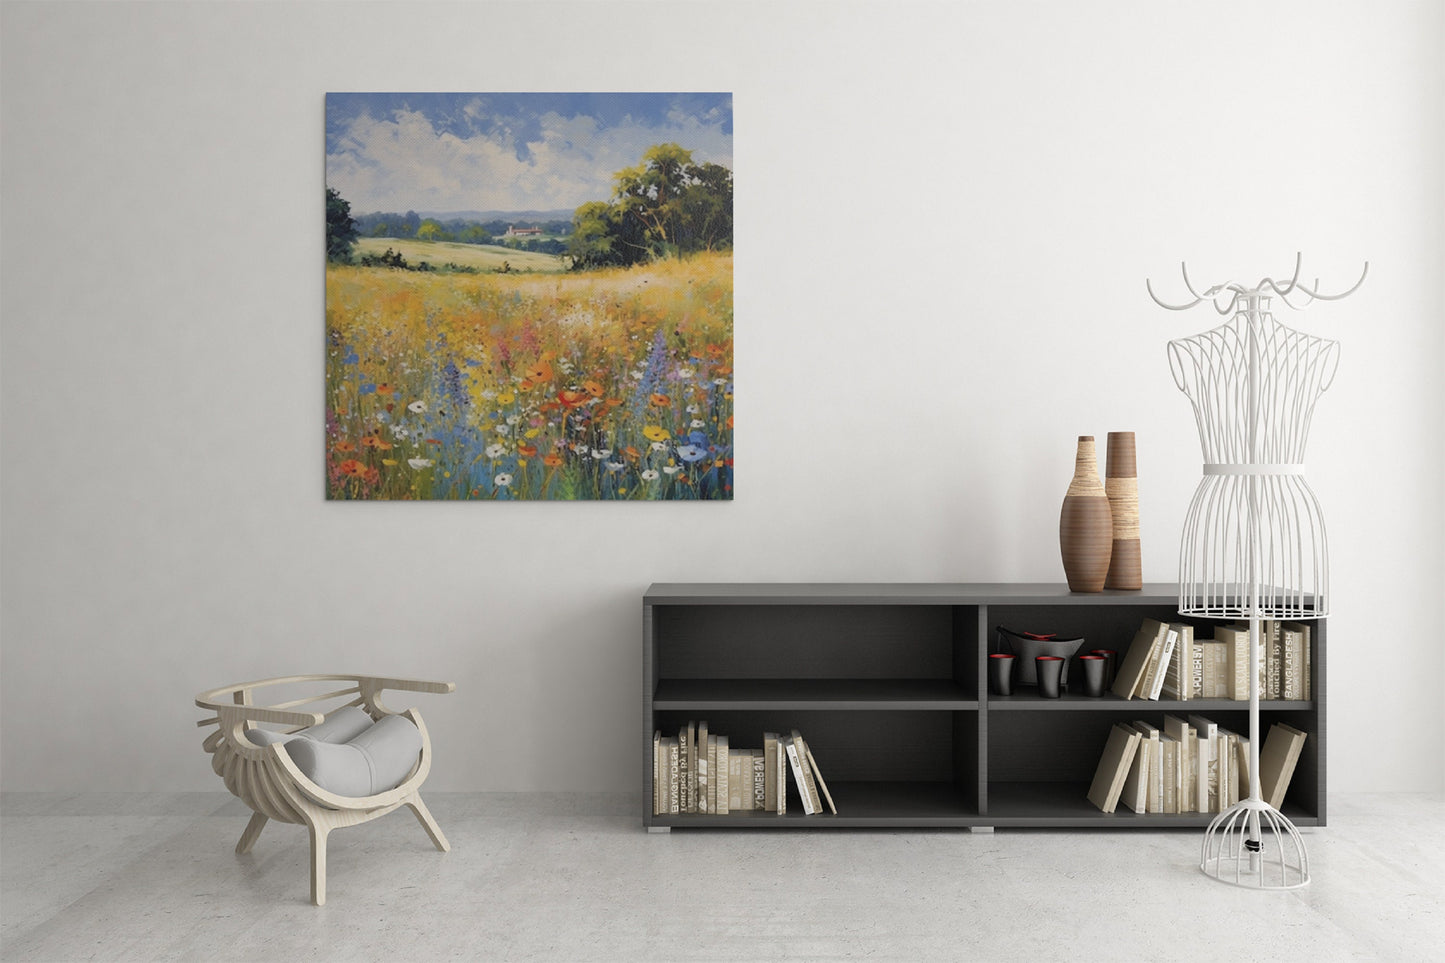 Wildflower Wall Art: Discover Beautiful Floral Prints to Elevate Your Décor - Shop Now for Affordable Prices and Fast Shipping!